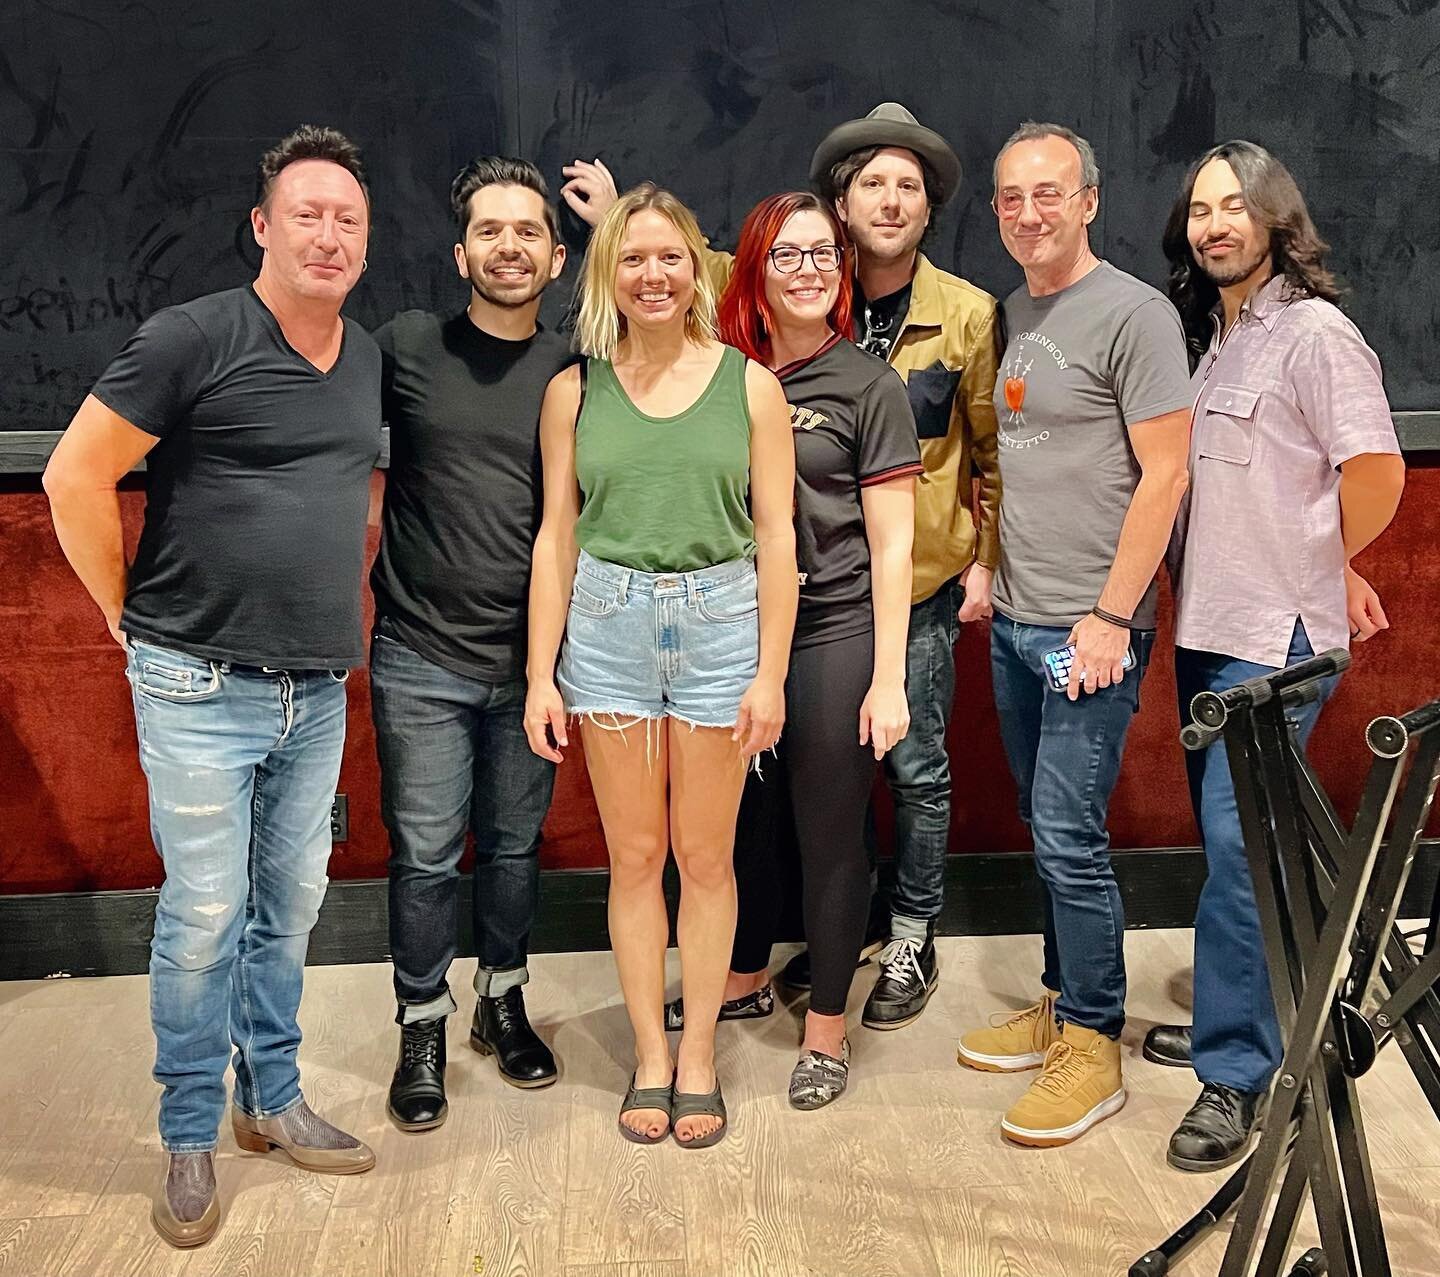 I&rsquo;ve been having a blast the last few weeks MD&rsquo;ing and playing guitar with Julian Lennon and this talented bunch of friends.  @kielfeher @neararussell @soundlady13 @stephenbelans @joshkmoreau